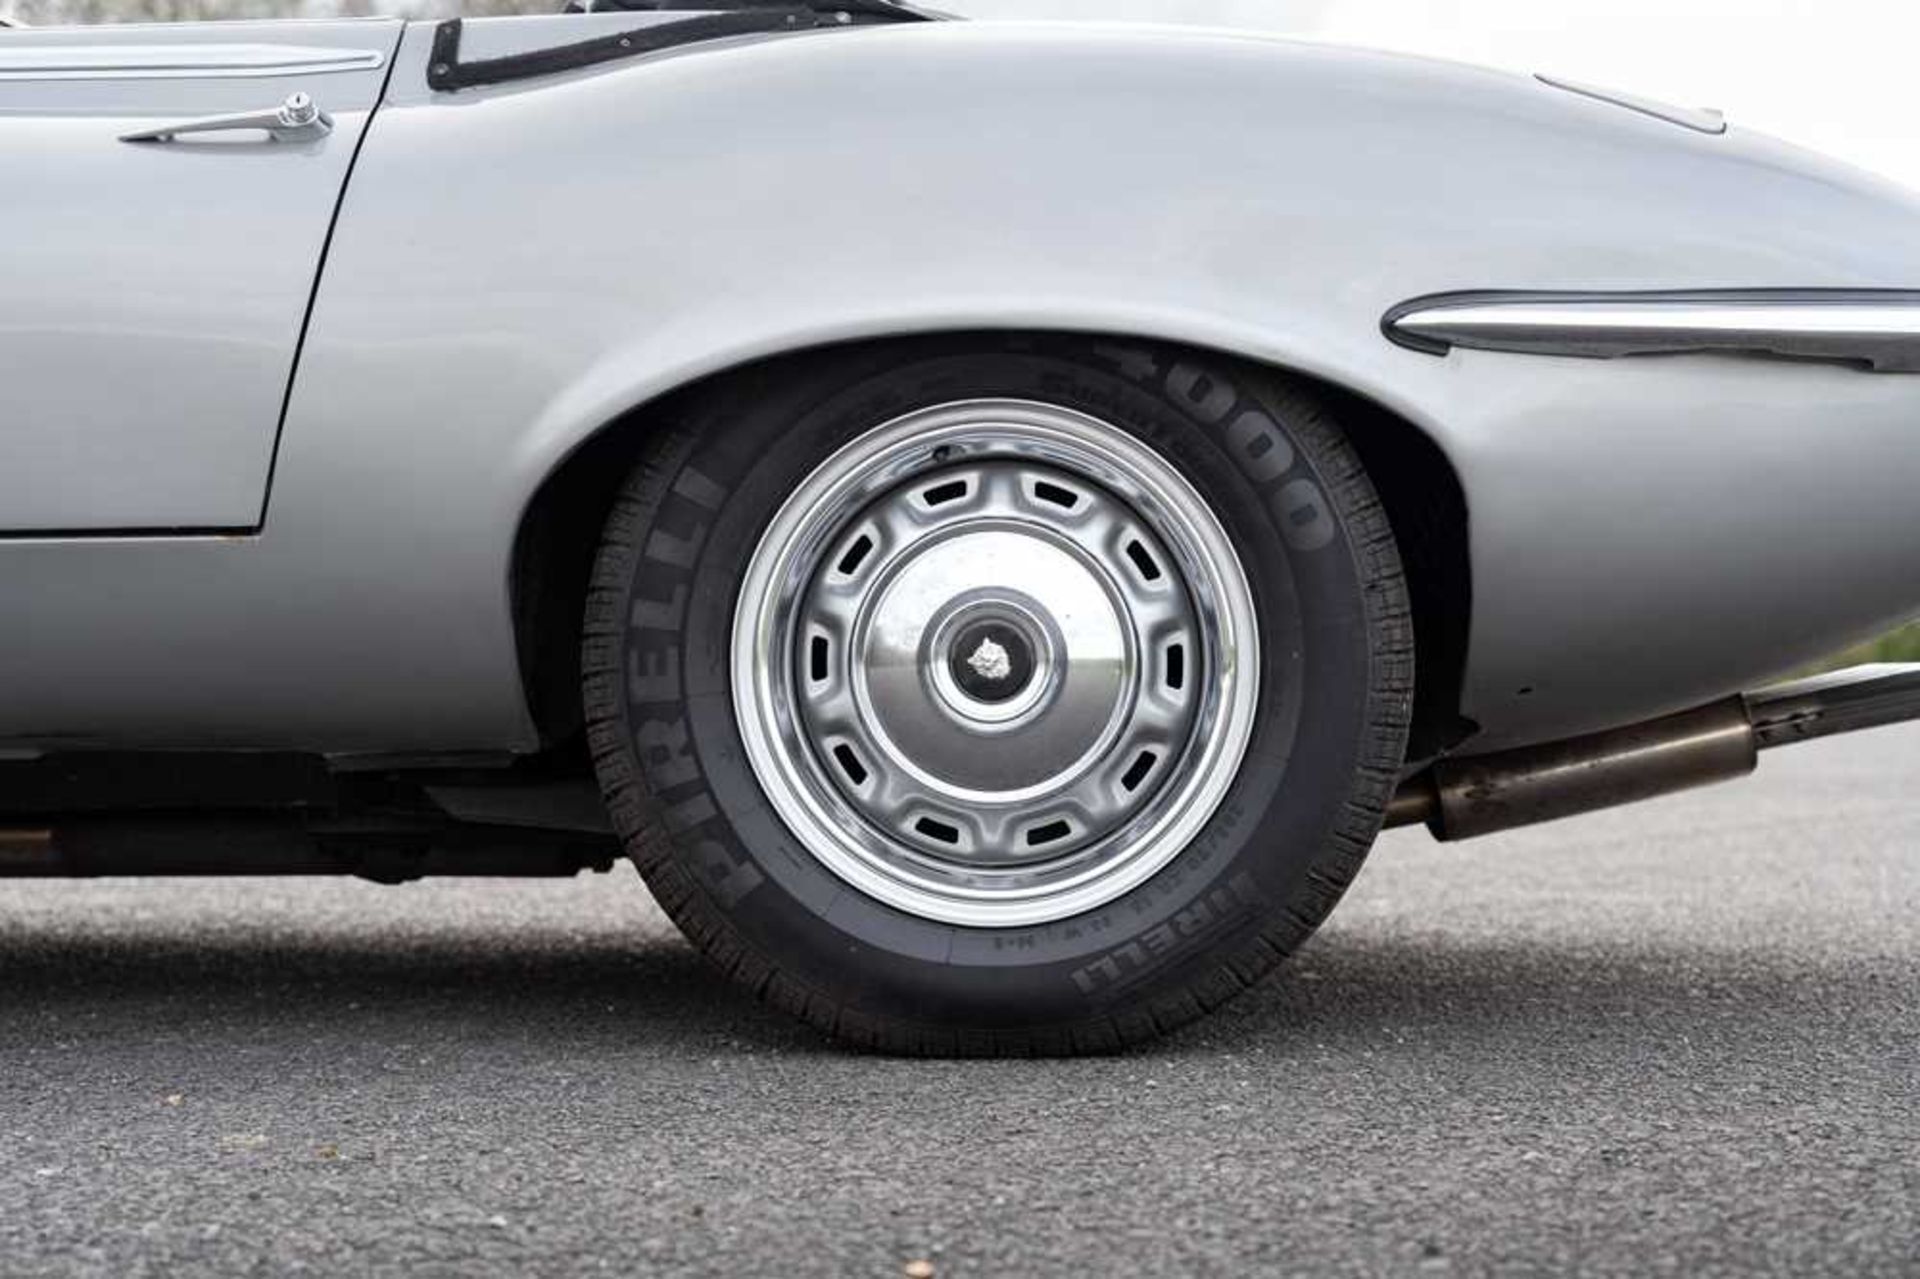 1974 Jaguar E-Type Series III V12 Roadster Only one family owner and 54,412 miles from new - Image 74 of 89